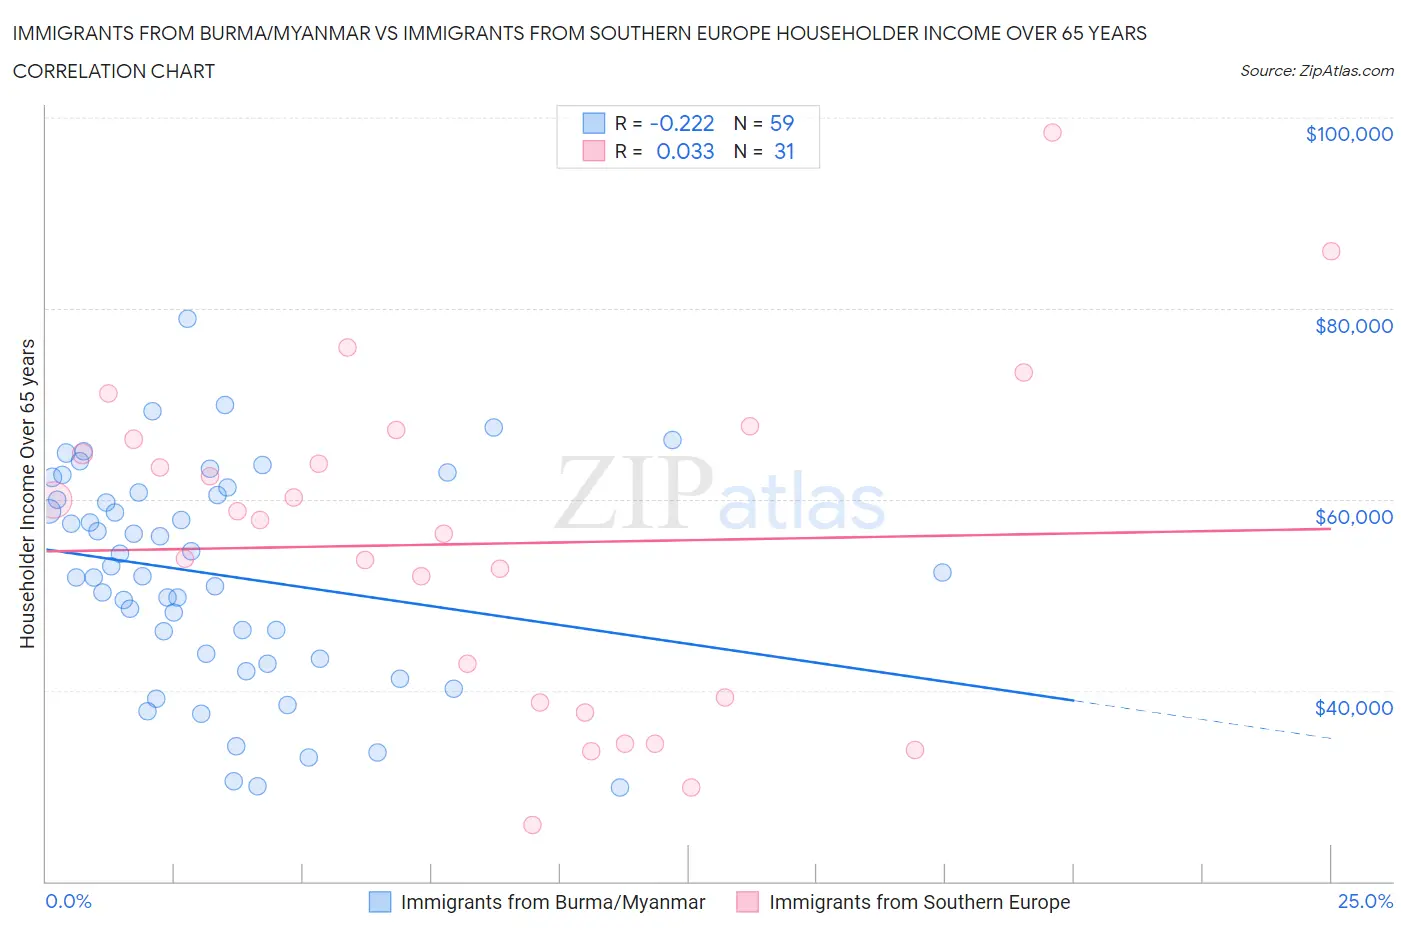 Immigrants from Burma/Myanmar vs Immigrants from Southern Europe Householder Income Over 65 years